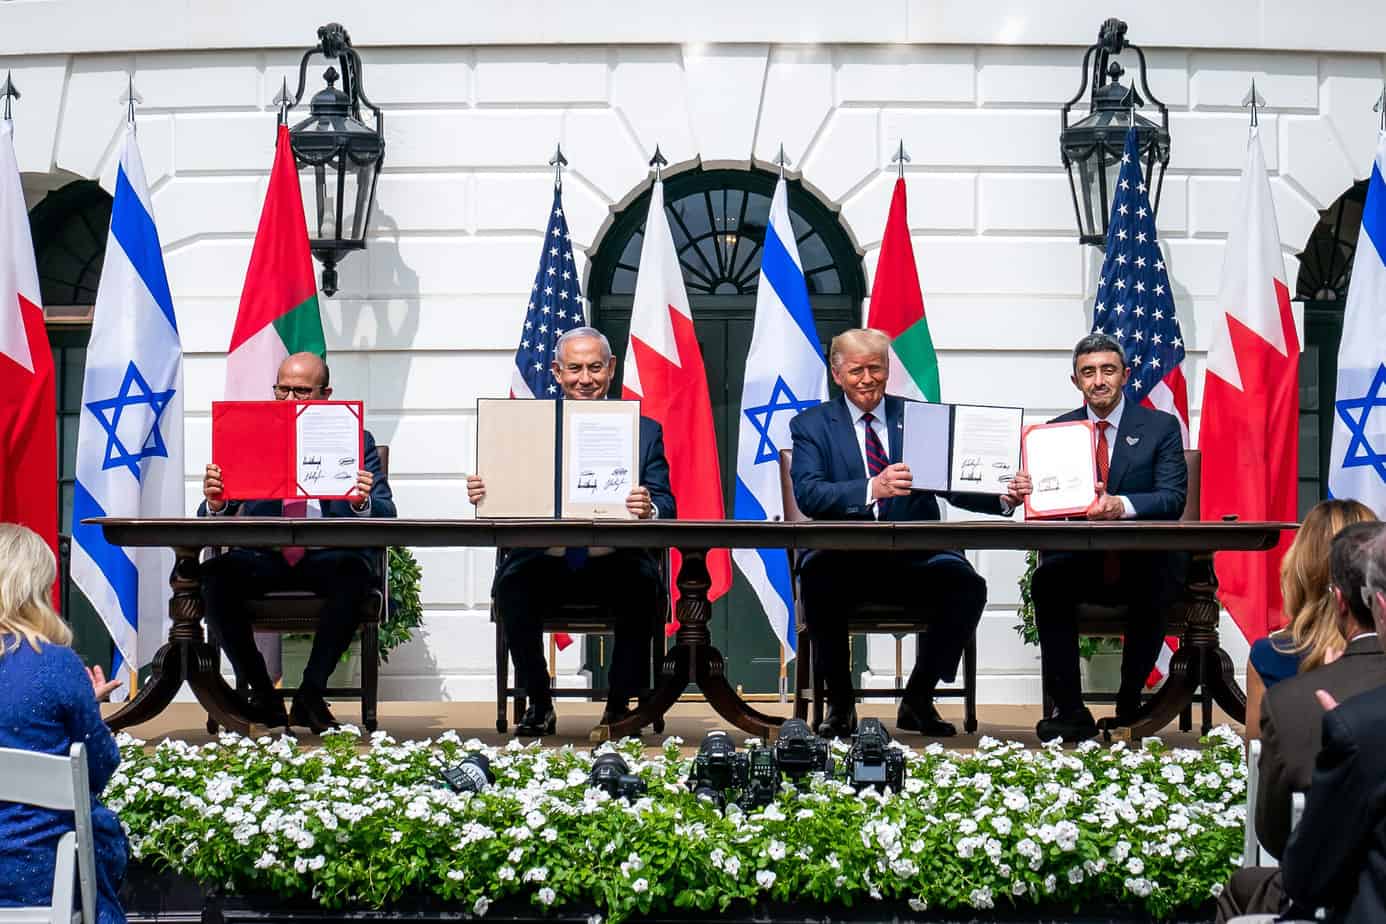 Israel Signs Peace Treaties With Two Arab Nations At White House (Pictures)